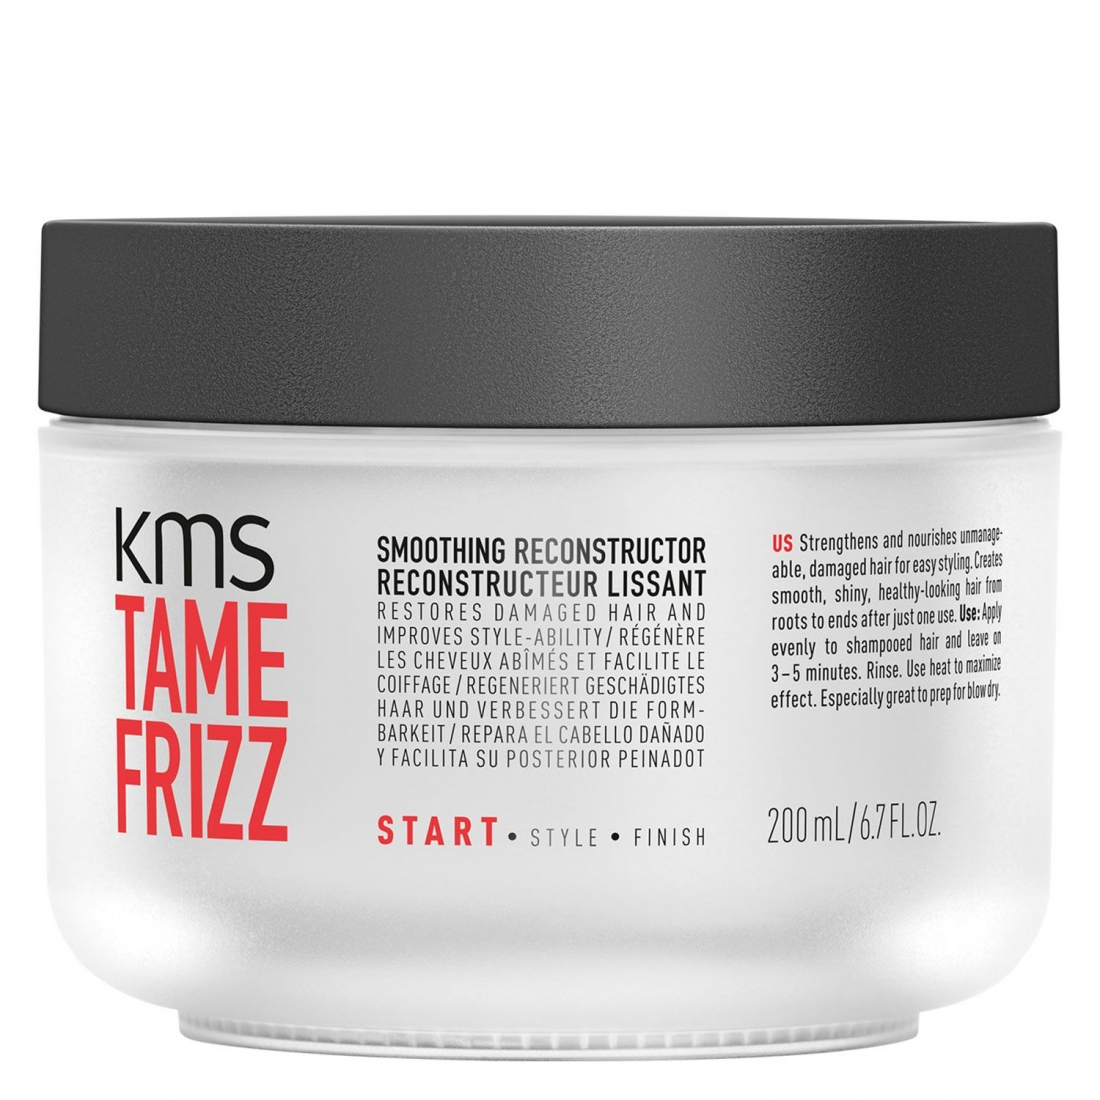 'Tamefrizz - Smoothing Reconstructor' Styling-Creme - 200 ml